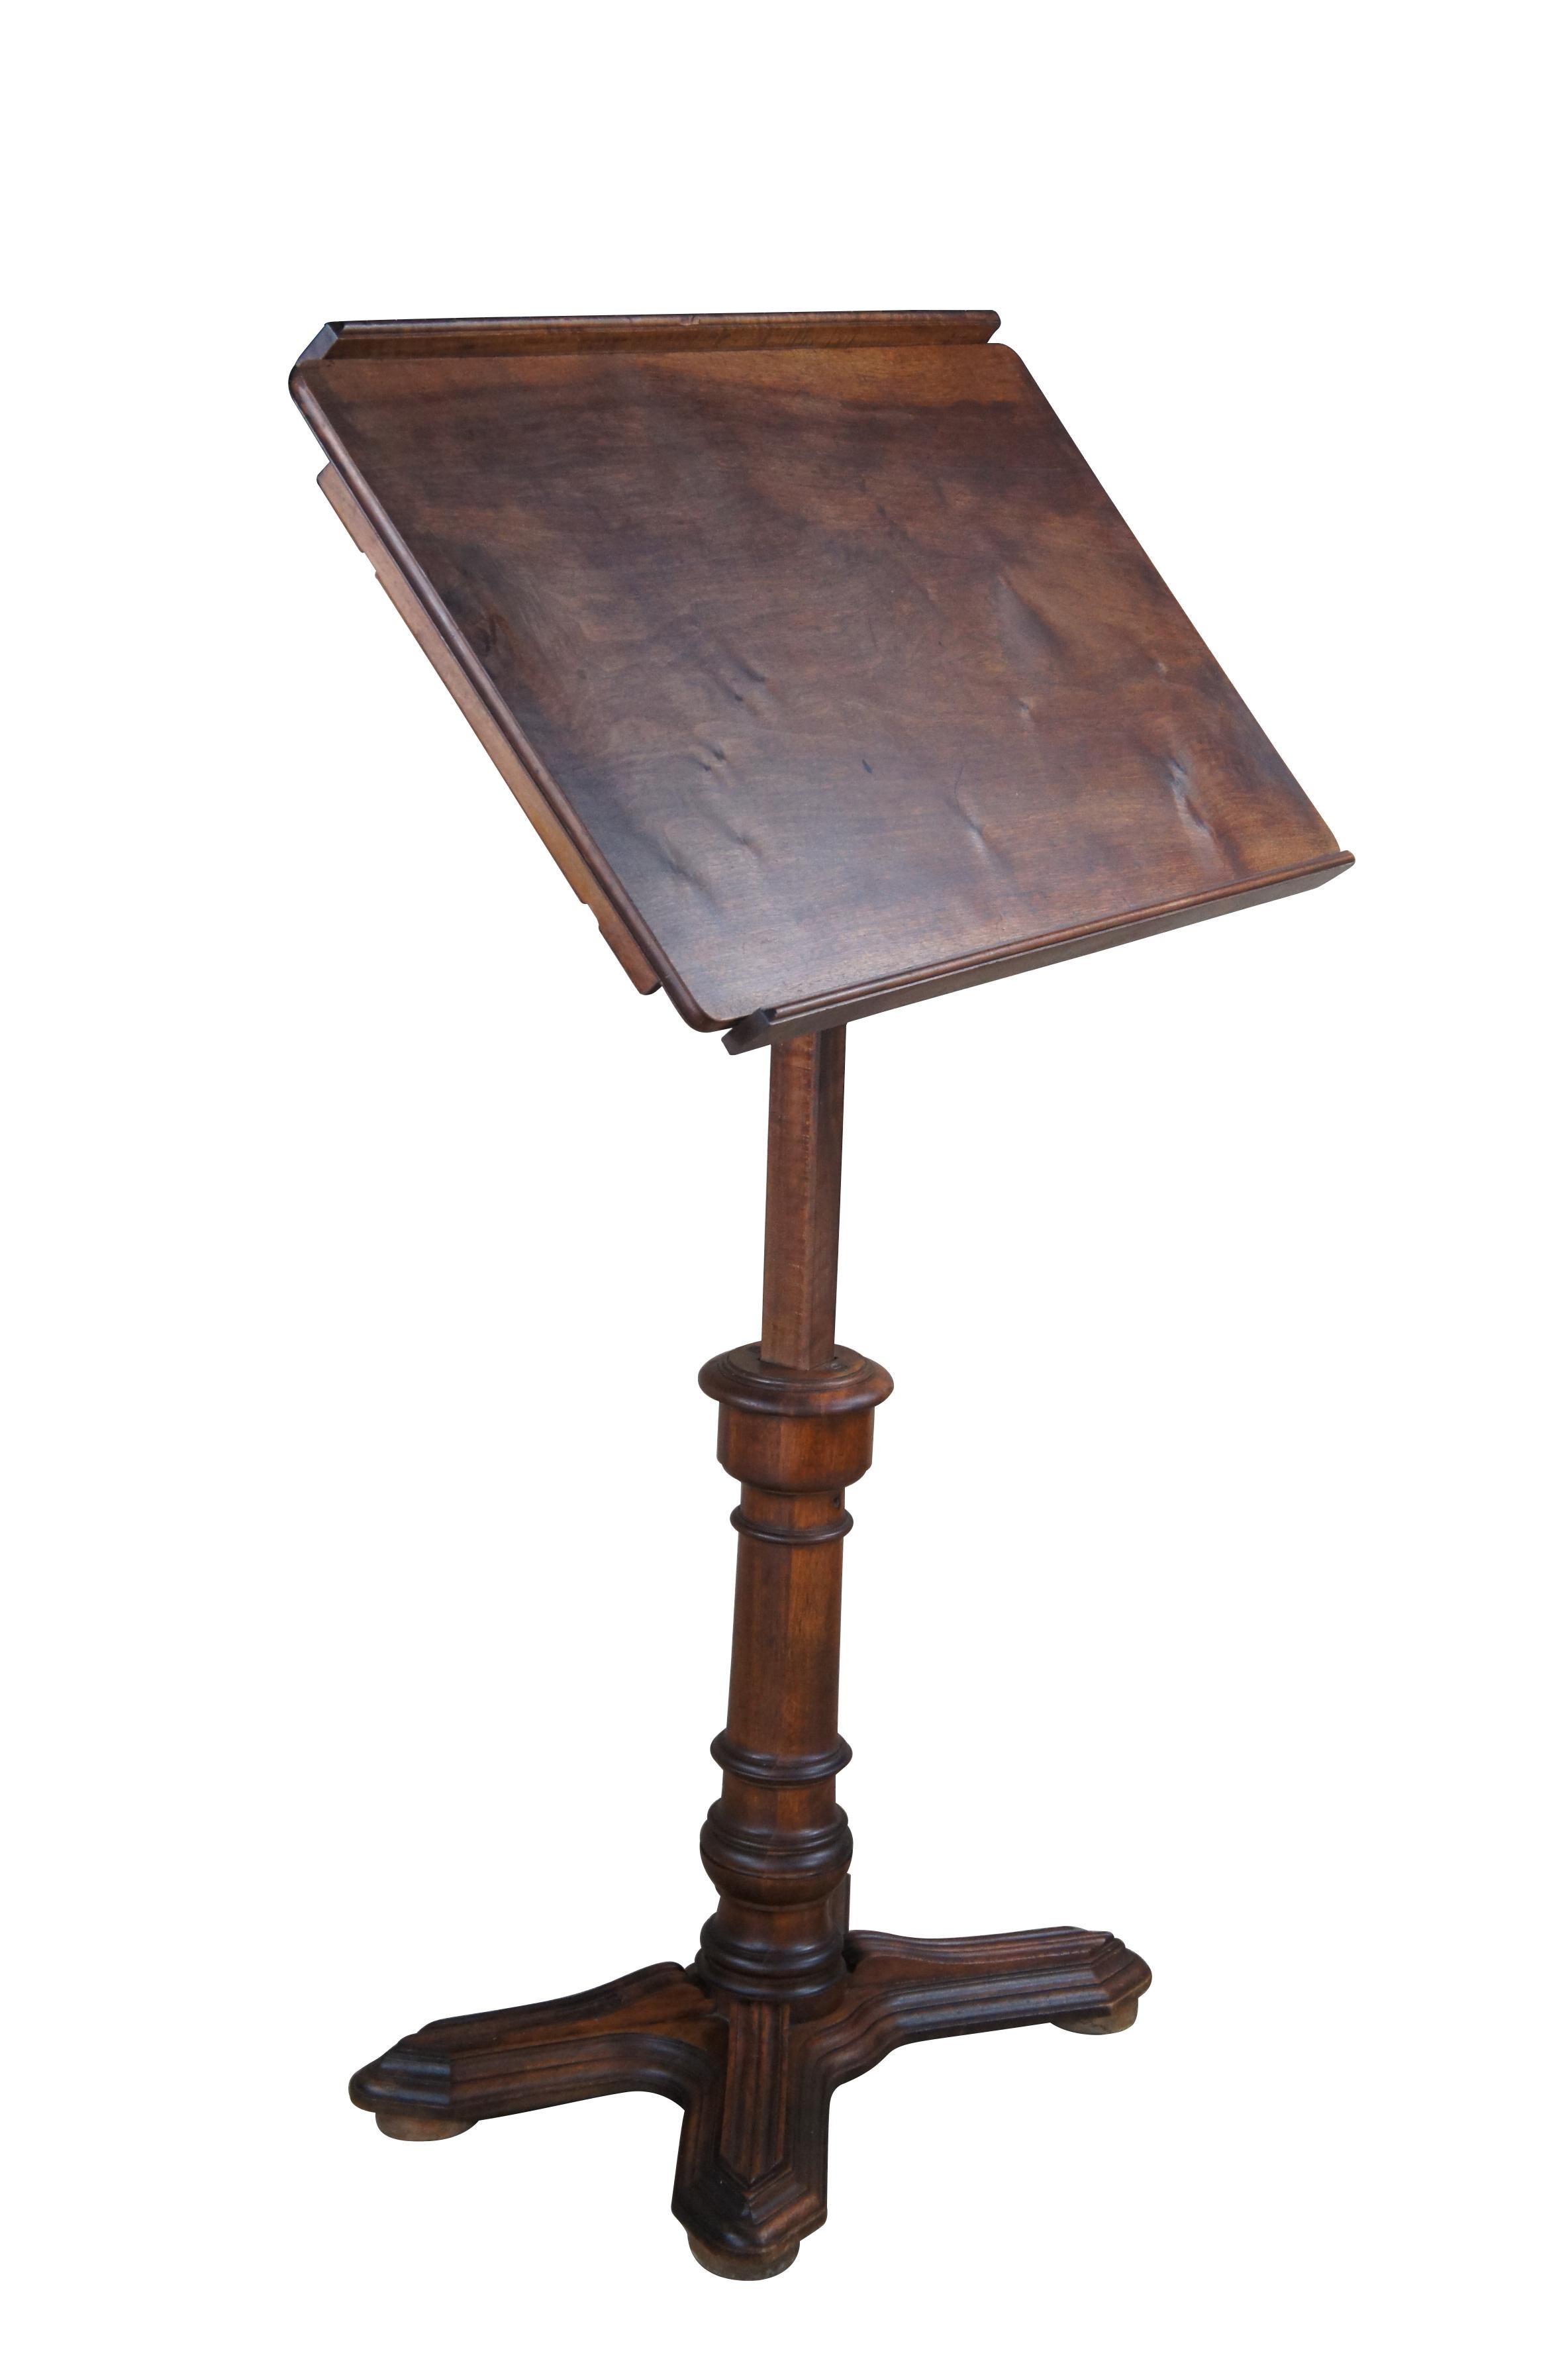 Antique circa 1870s drafting table or lecturn manufactured by Emile Chouanard, the director of the Aux Forges de Vul-cain in Paris at 3 rue Saint-Denis.  This late 19th century drawing board / architect stand features a top that is completely